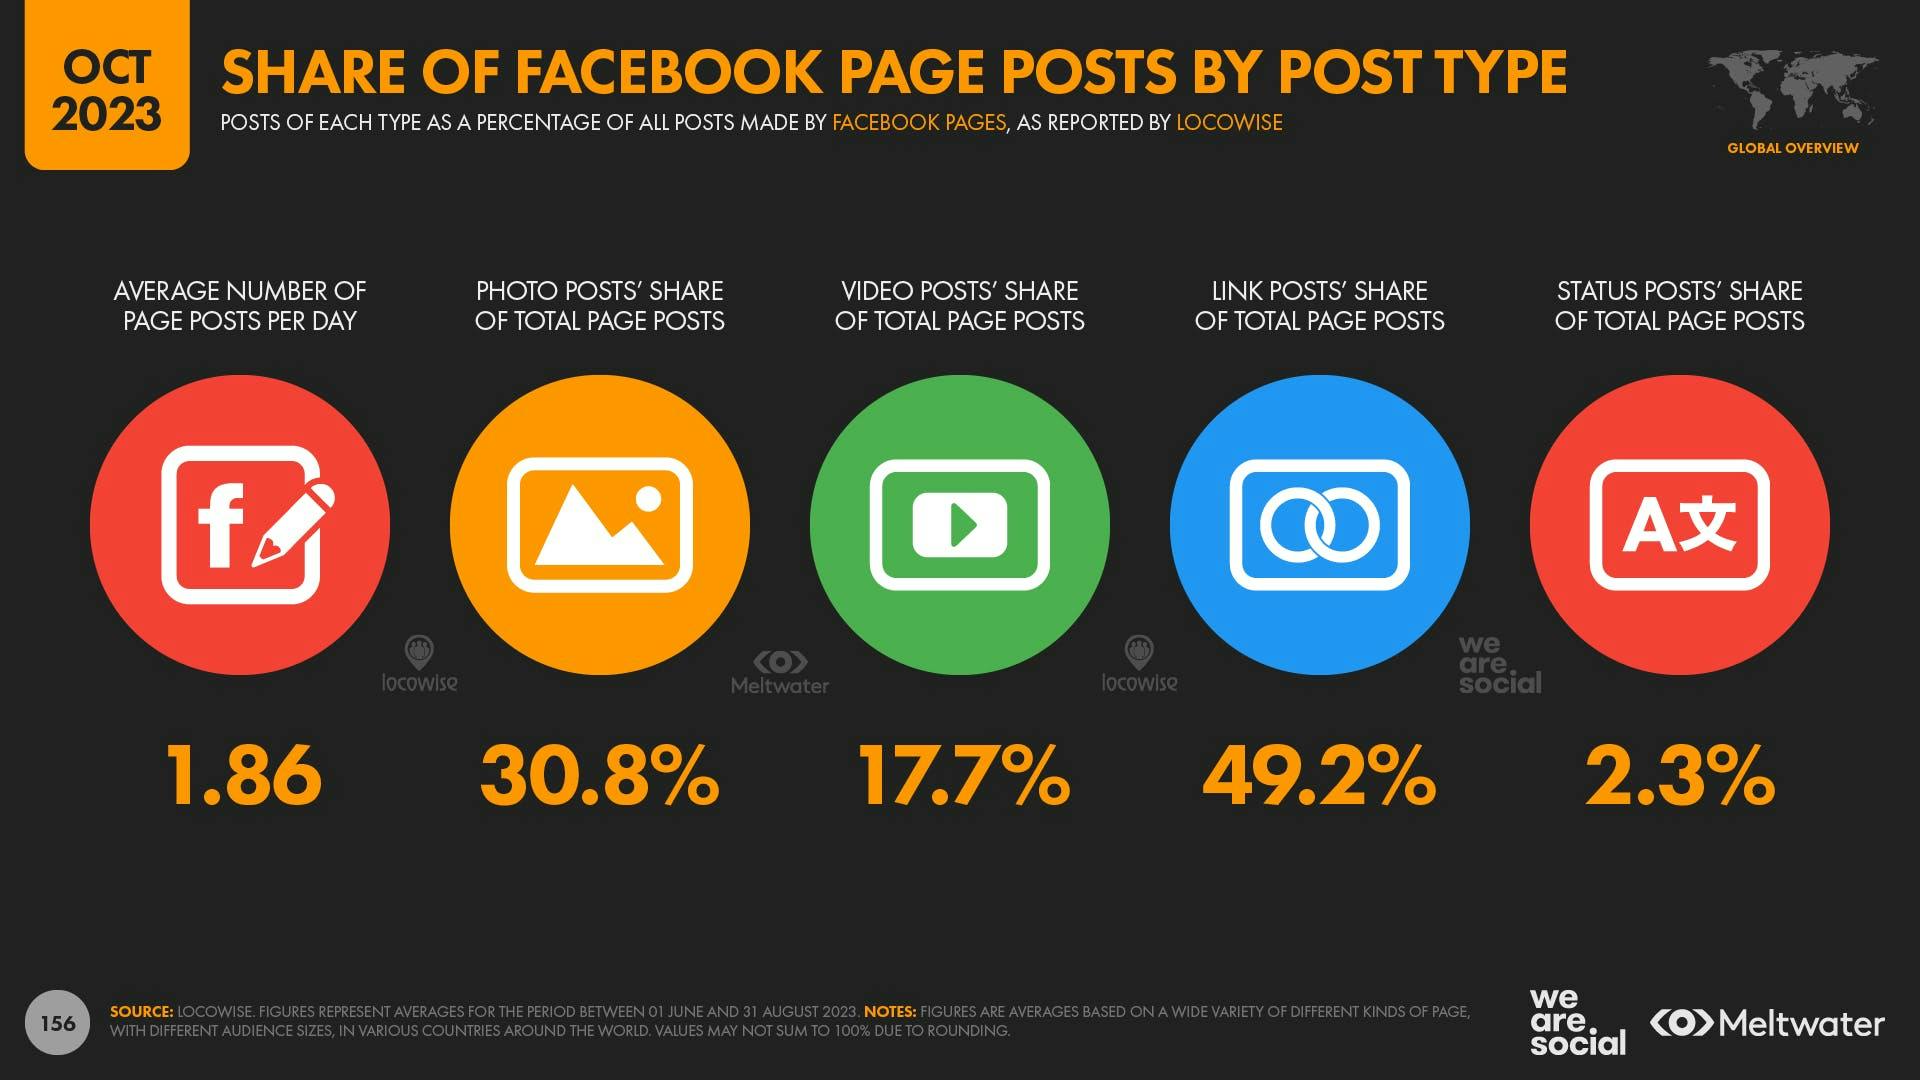 October 2023 Global Digital Report: Share of Facebook page posts by post type